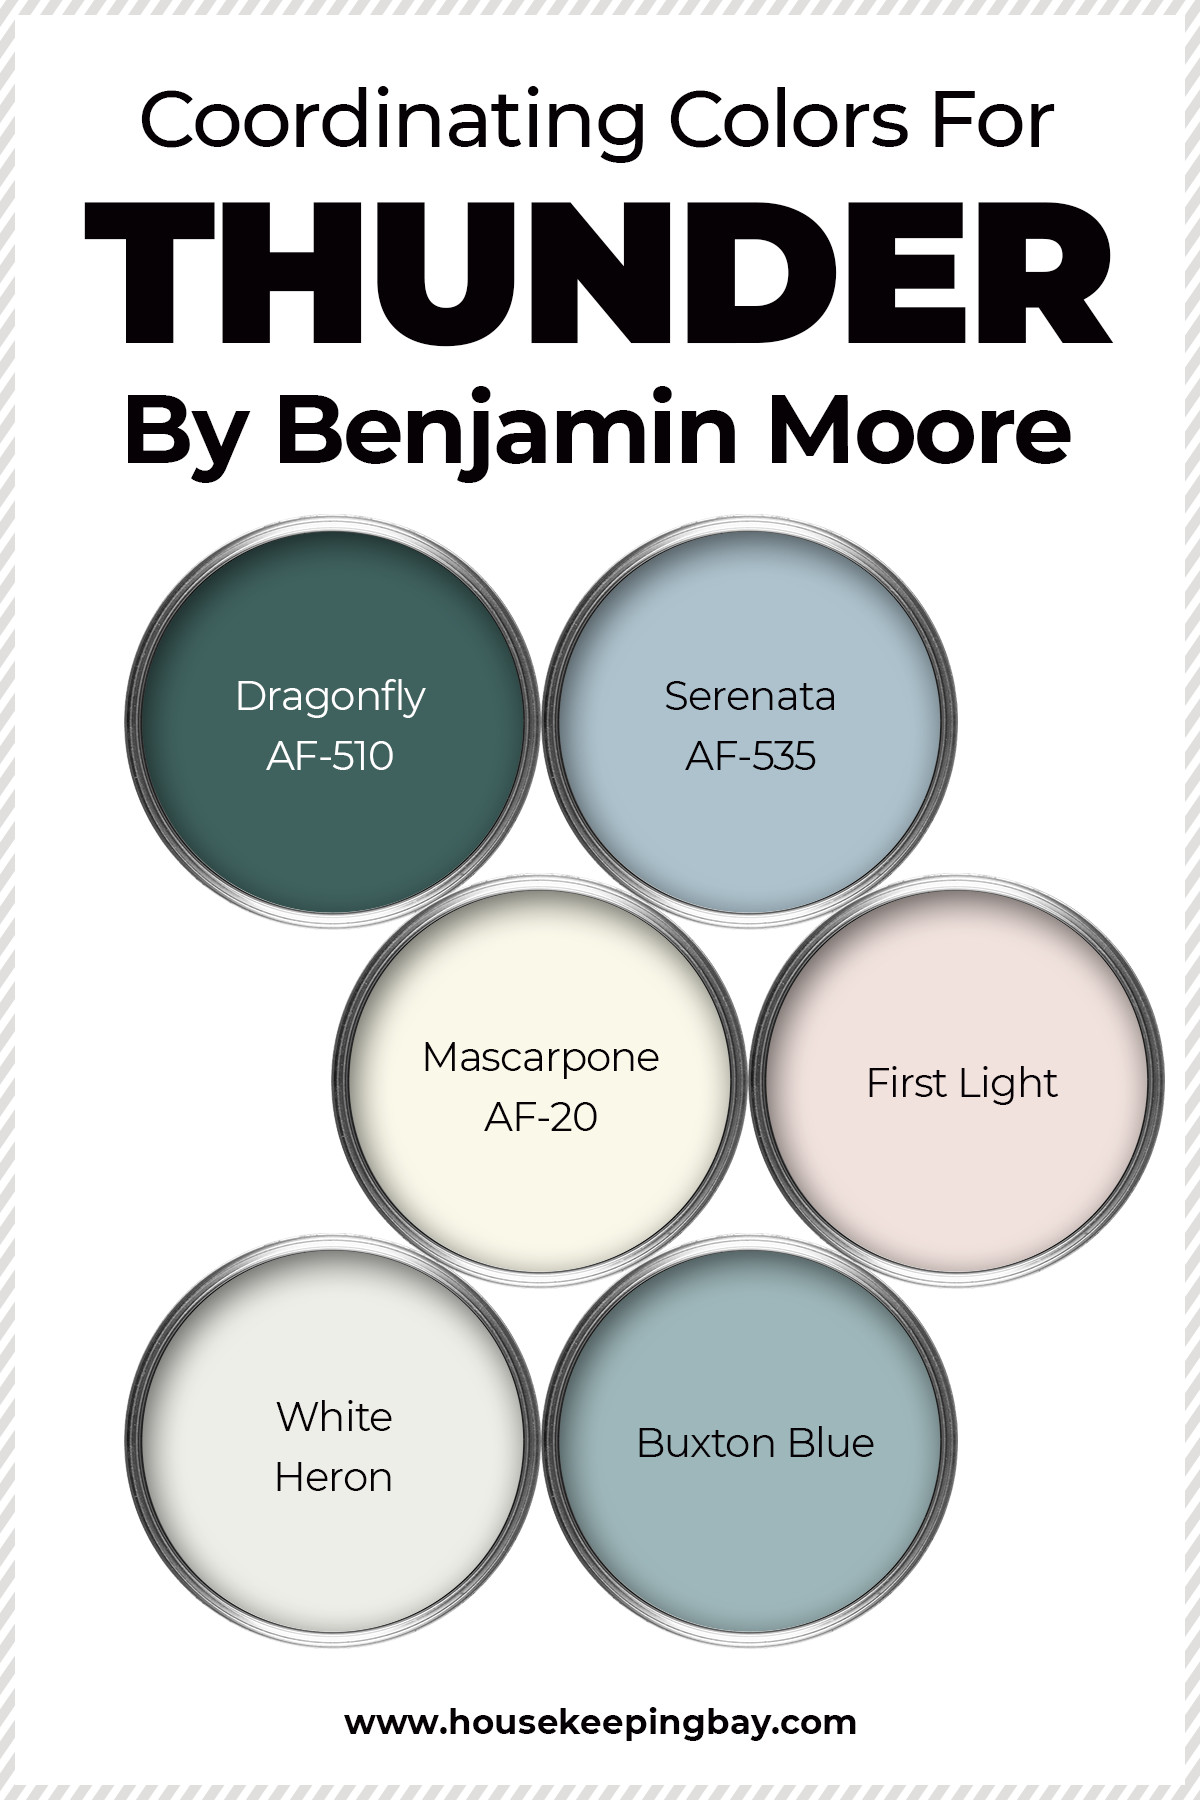 Thunder By Benjamin Moore Coordinating colors